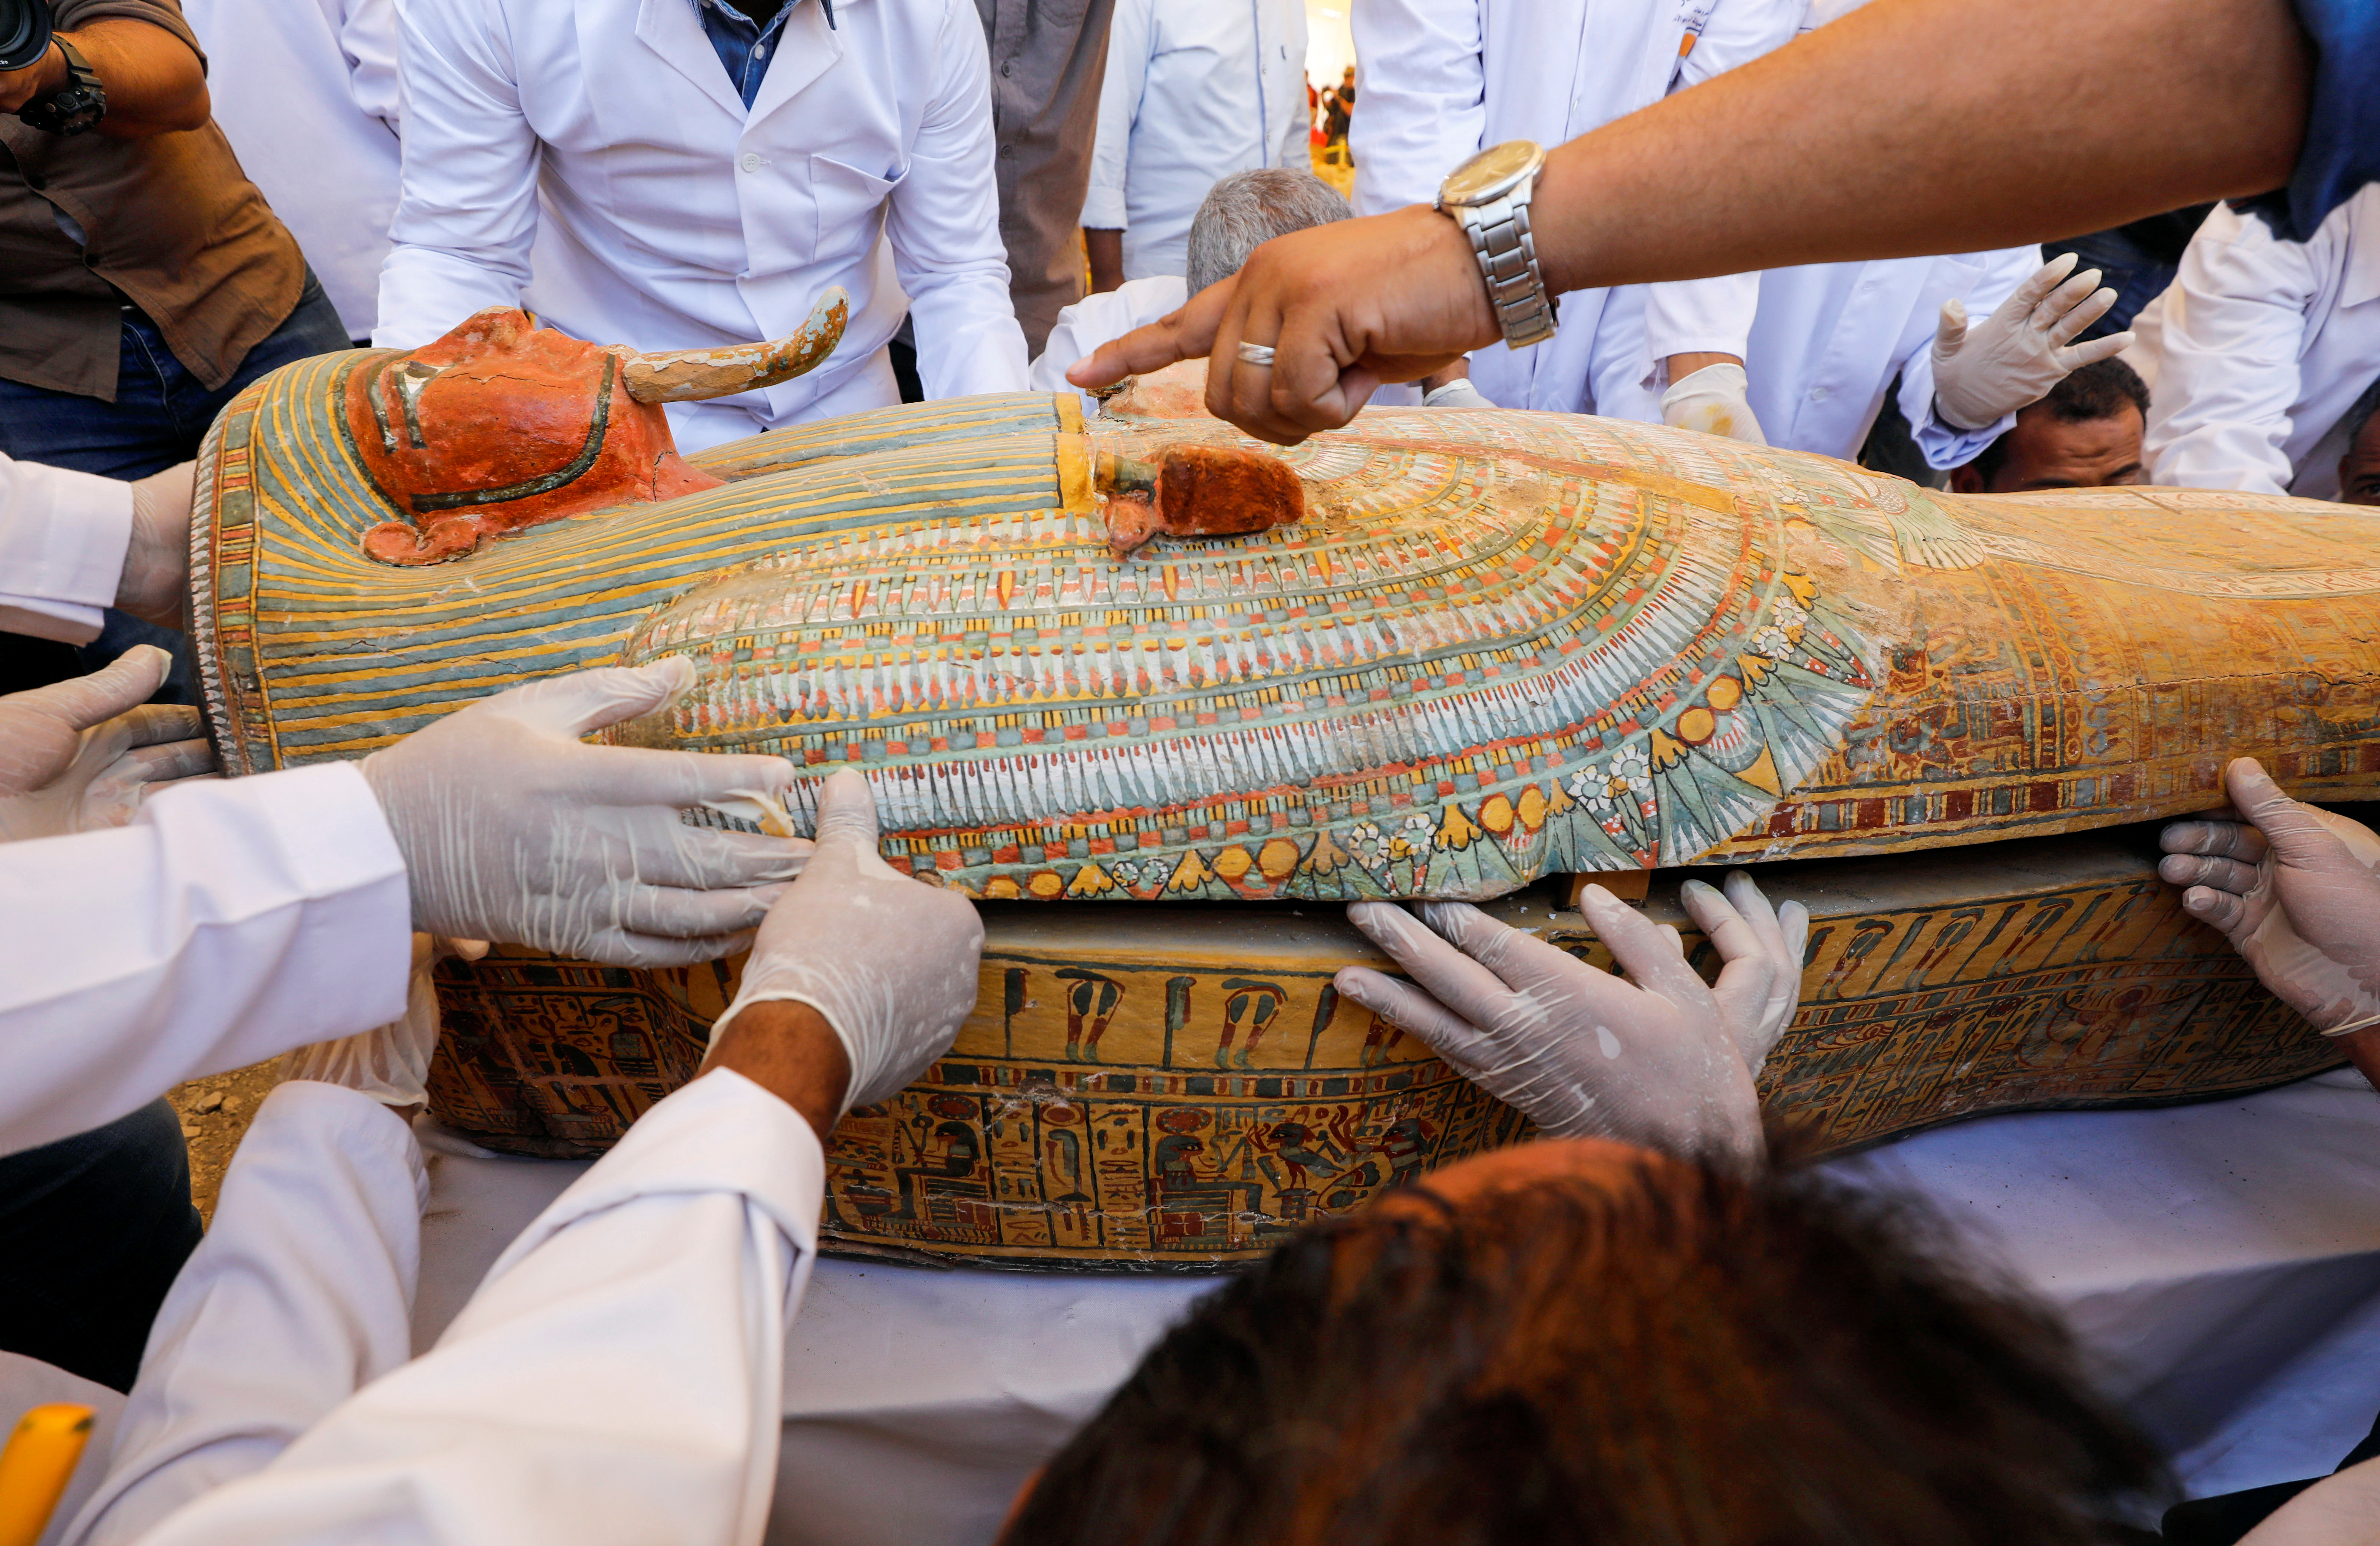 In pictures: Thirty ancient coffins discovered in Egypt | Middle East Eye